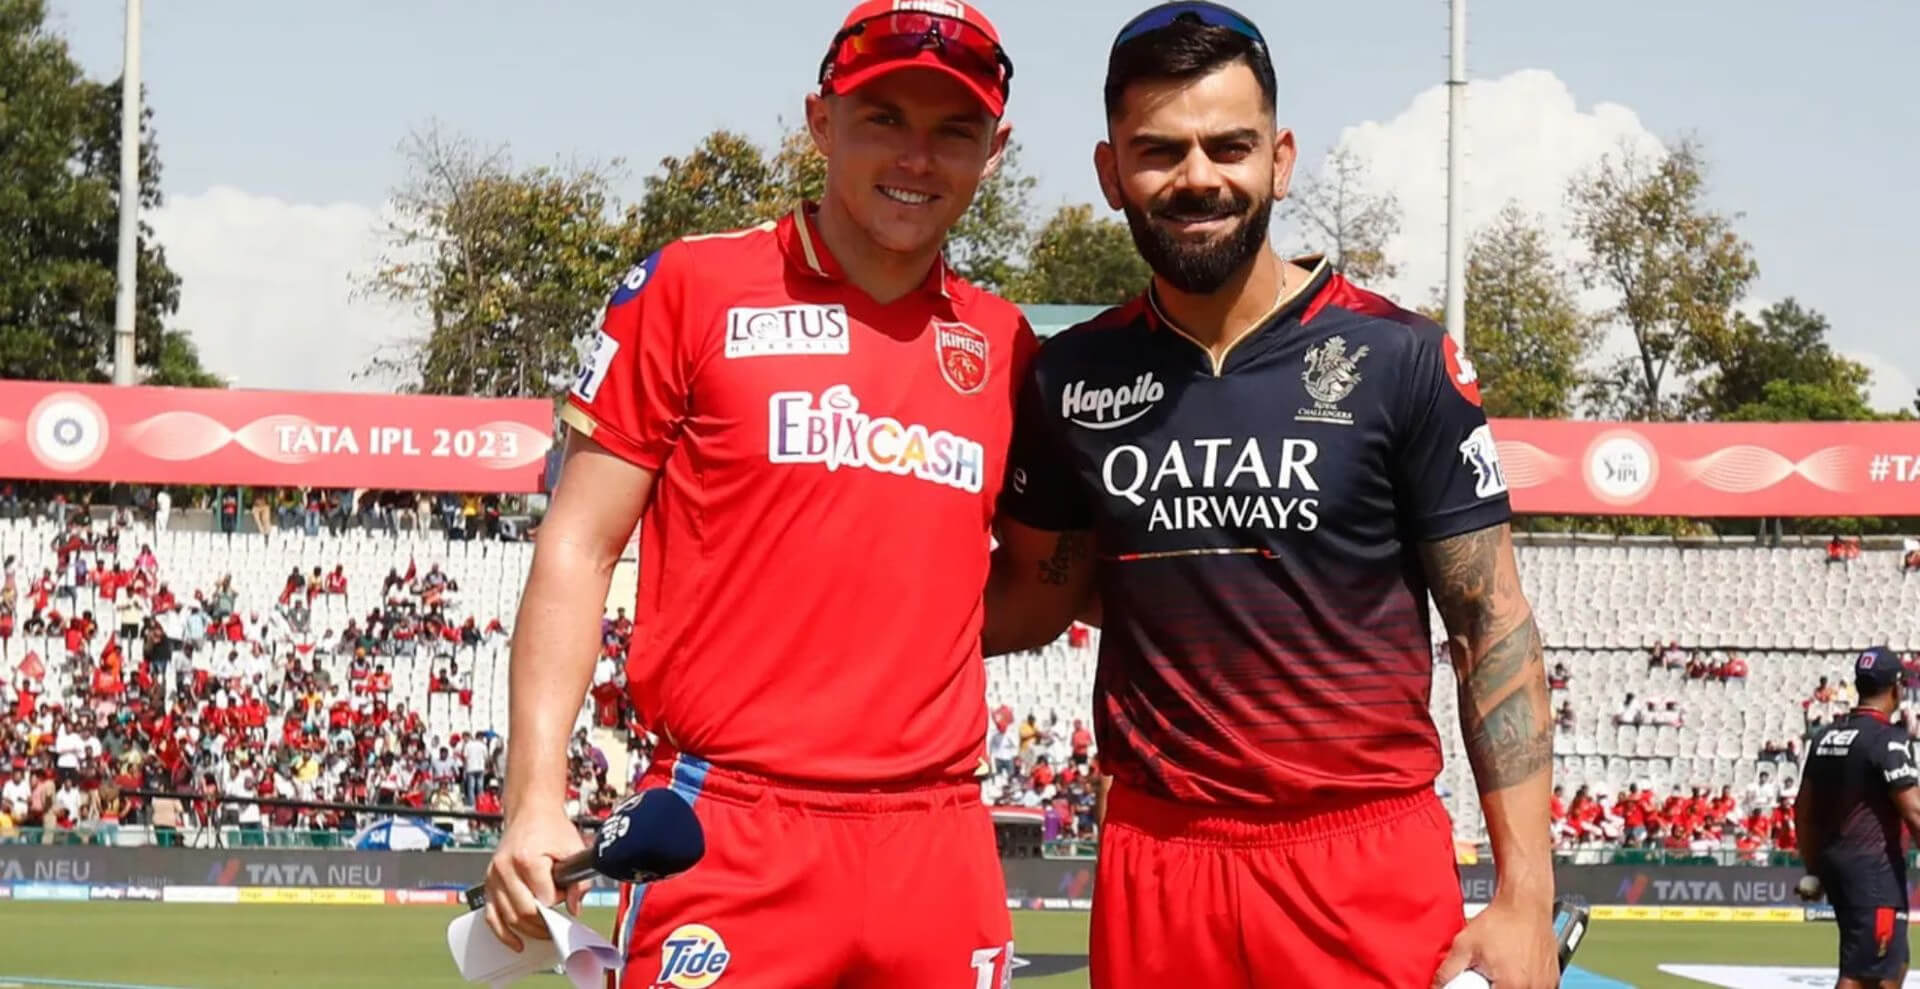 PBKS have Liam Livingstone back in the lineup, and RCB's Virat Kohli will be leading his team.